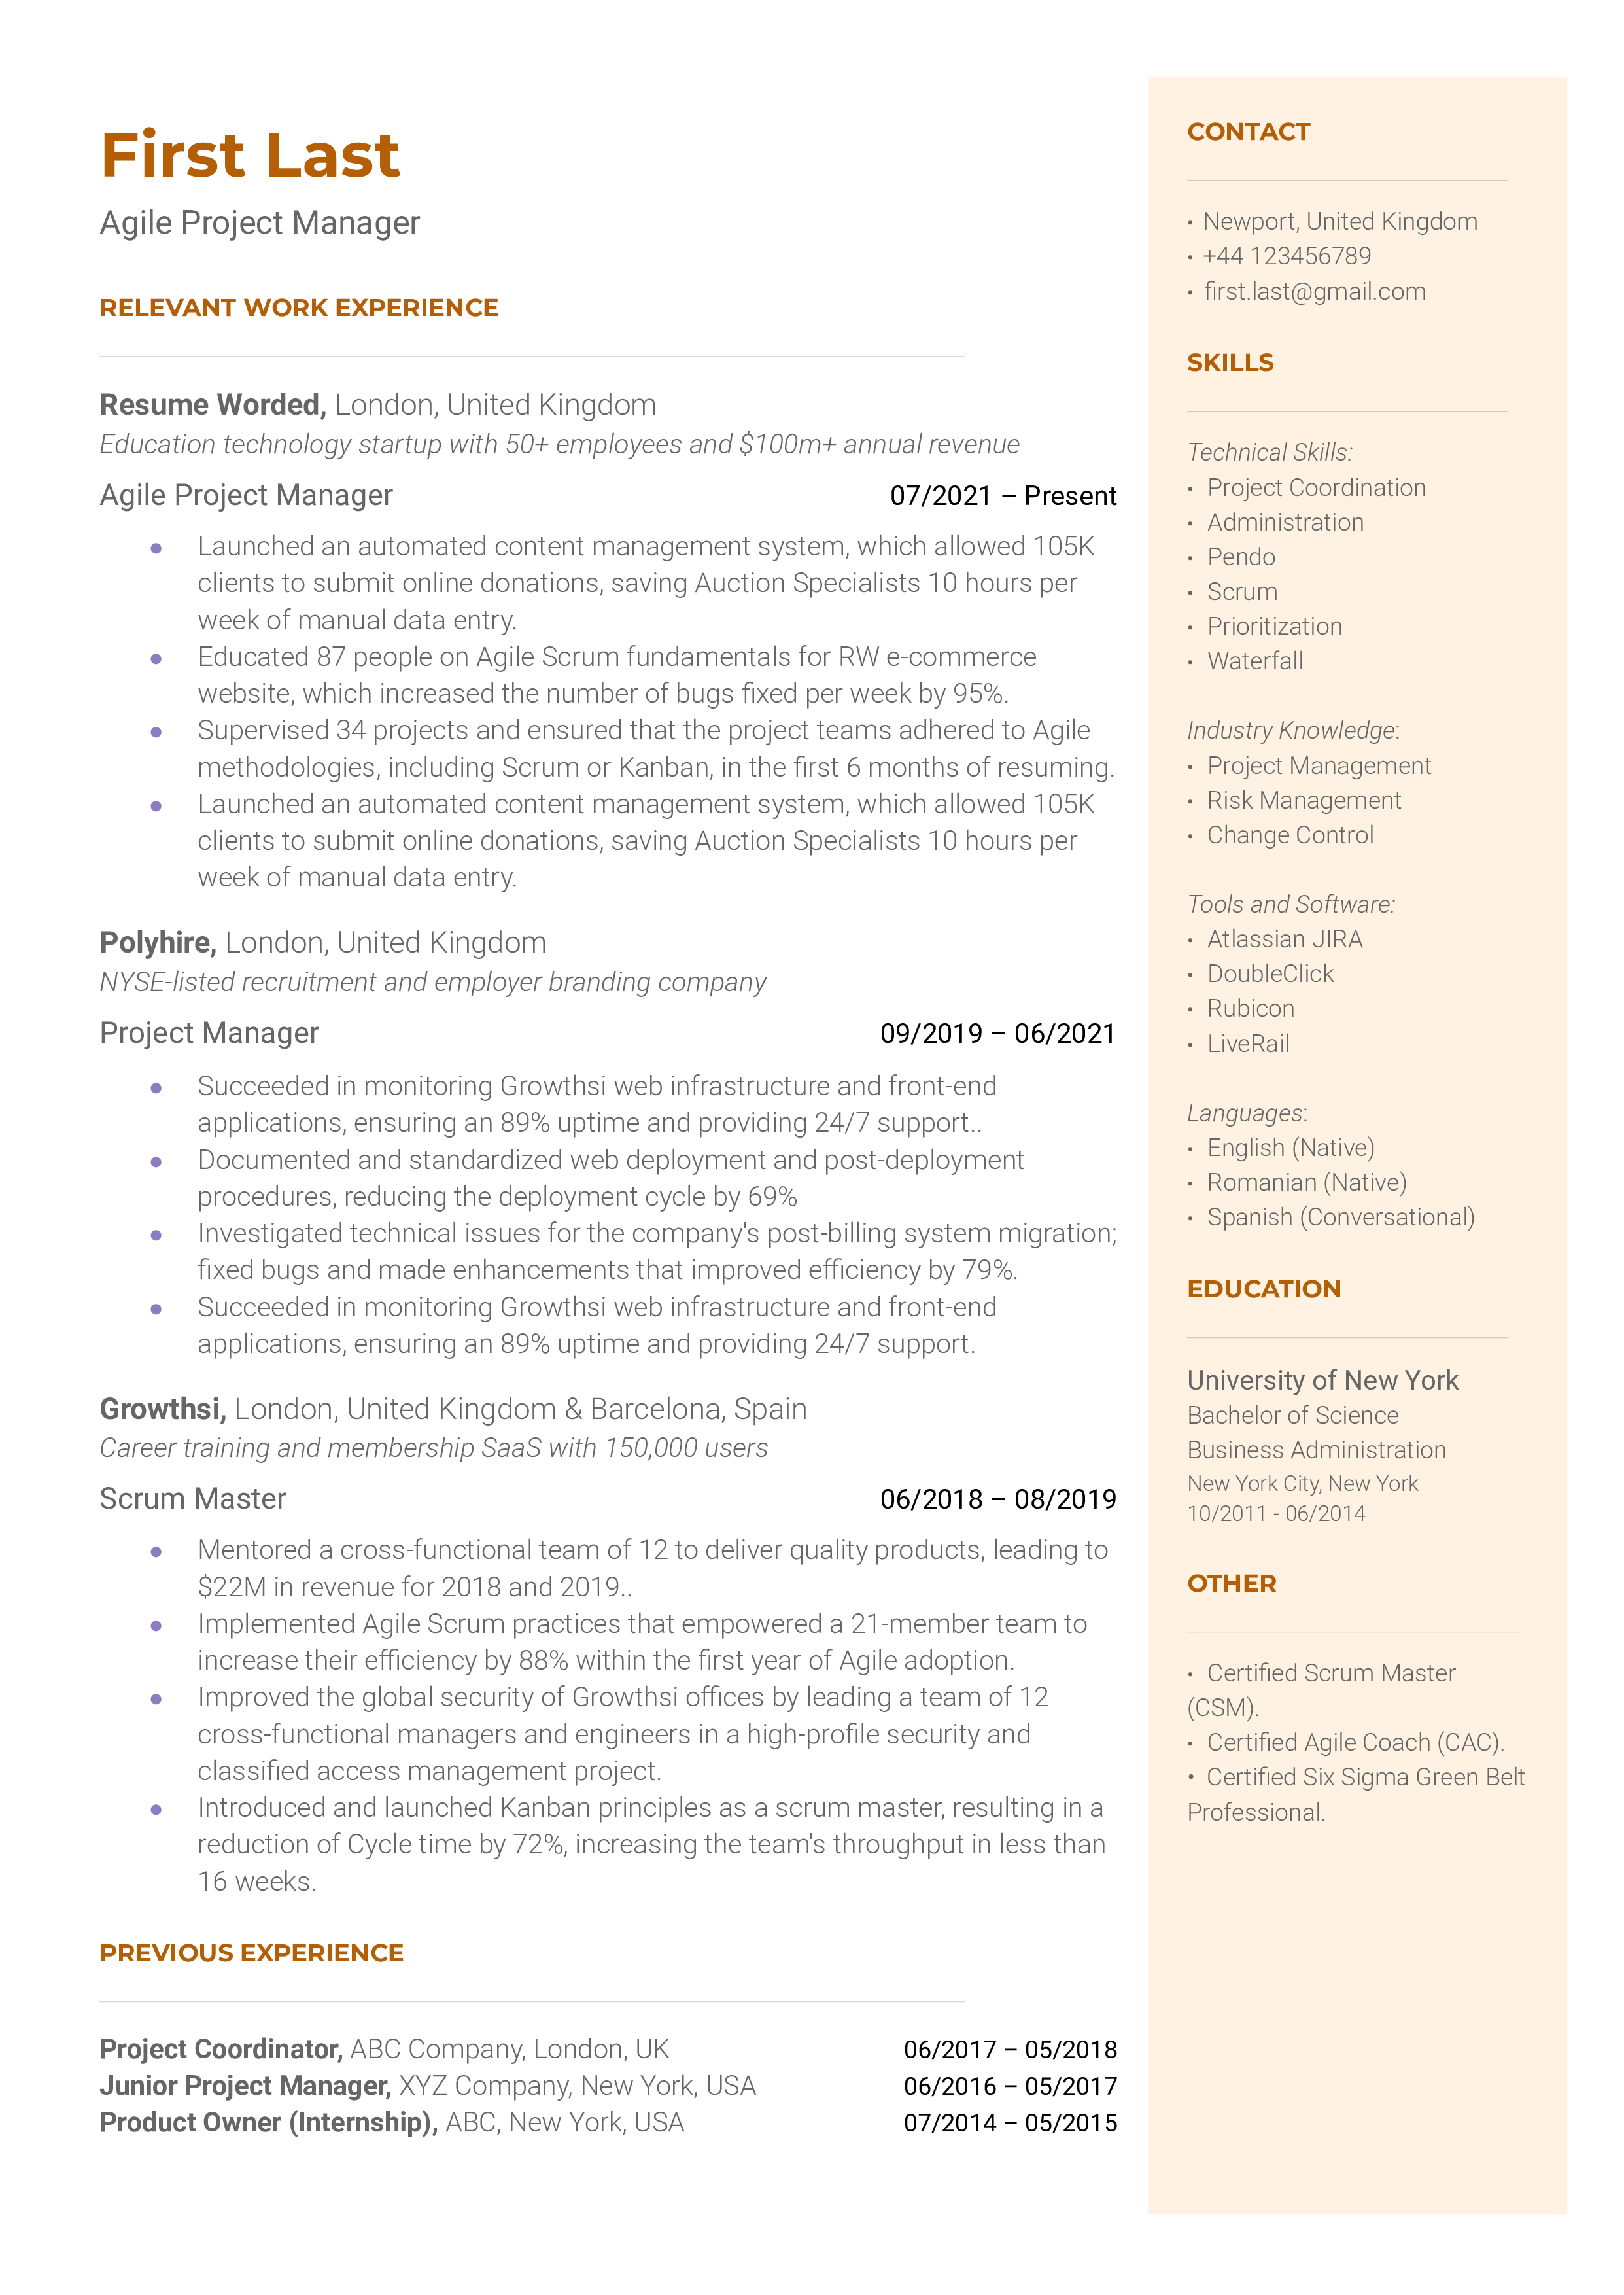 An example of a CV tailored for Agile Project Manager positions.